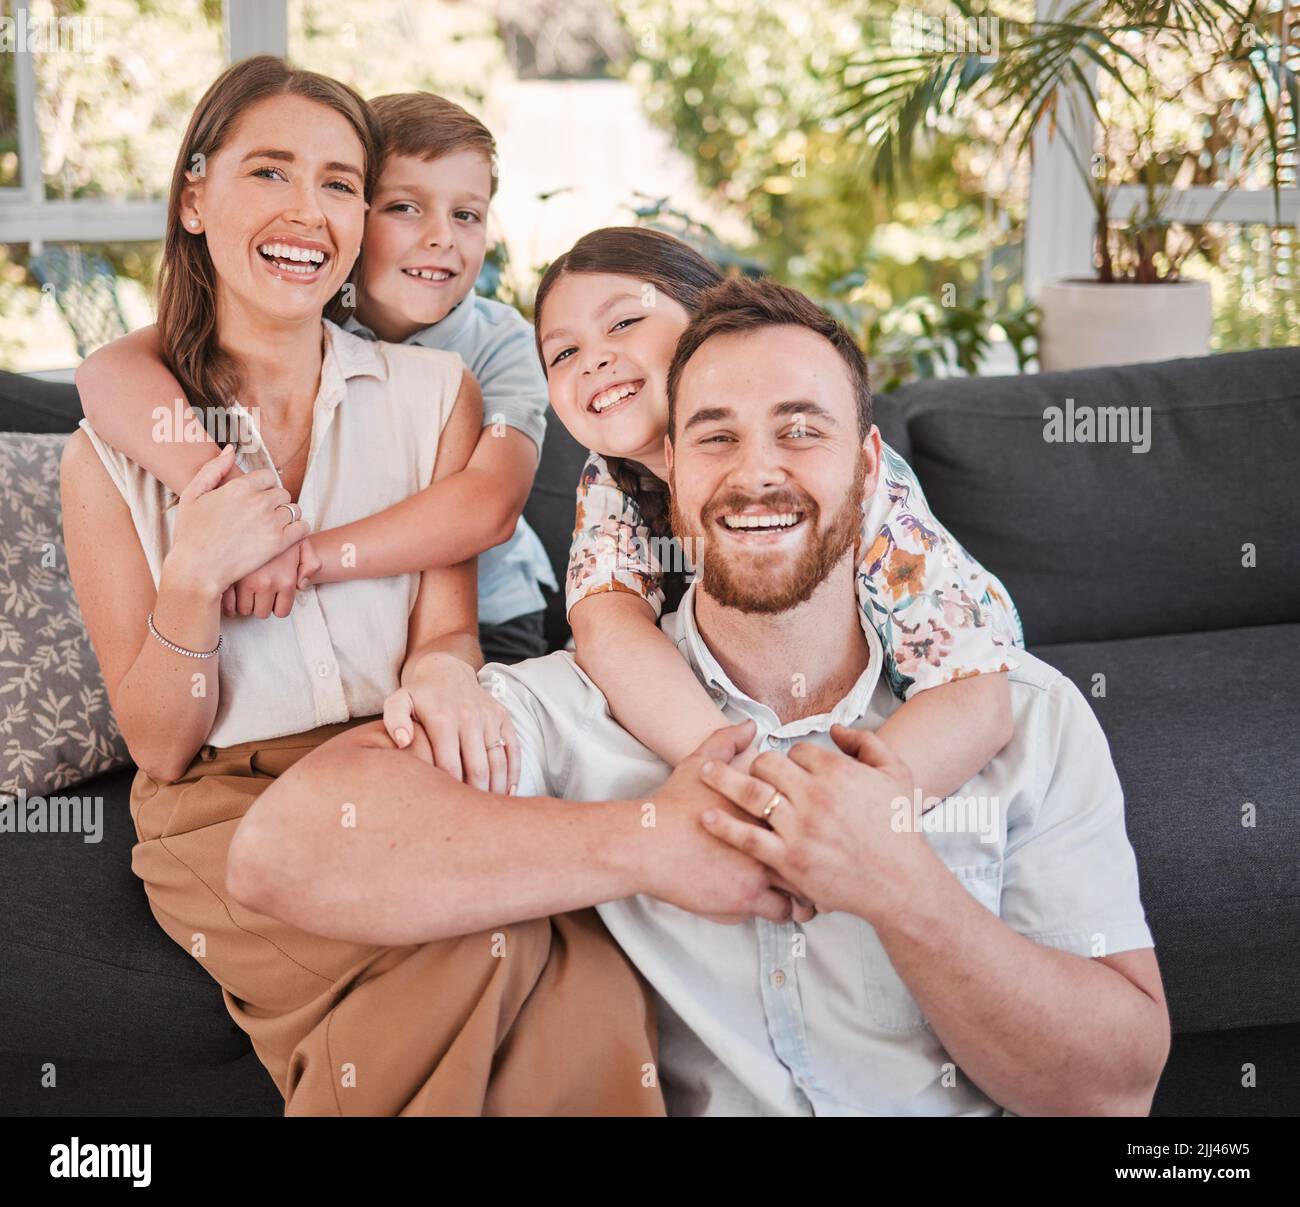 Lay it back. a young family happily bonding together on the sofa at home. Stock Photo